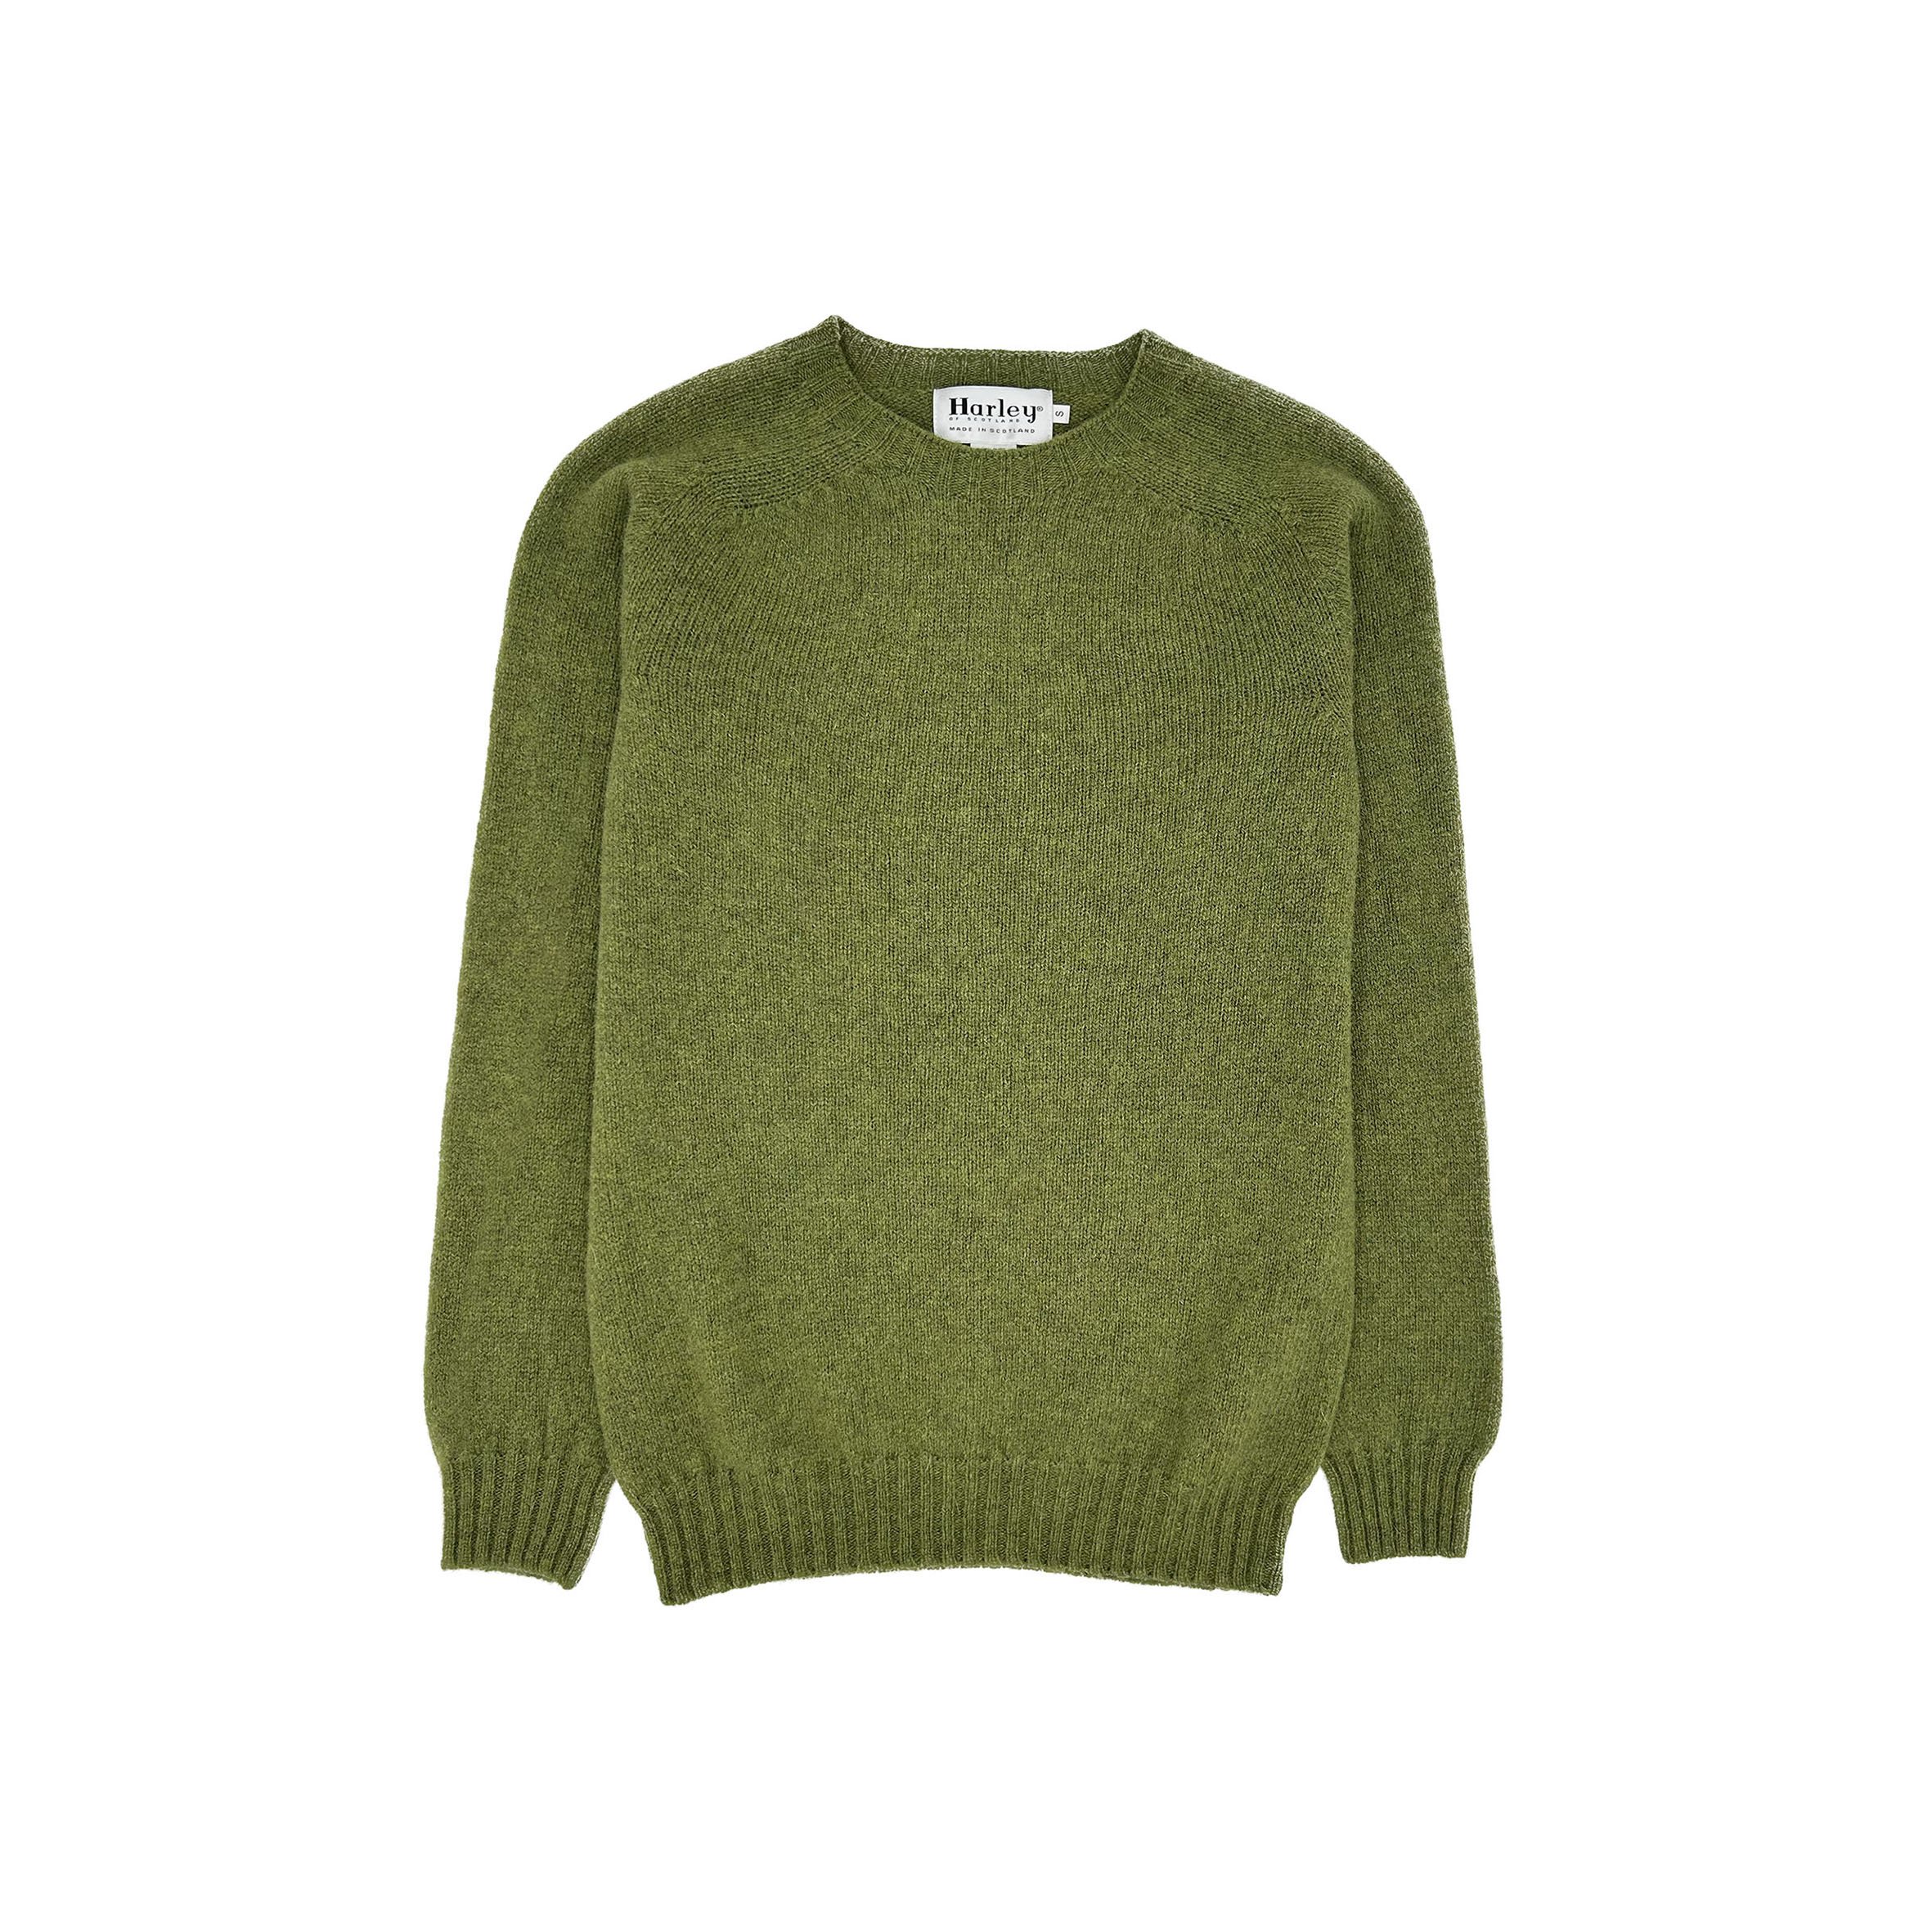 Quality Seamless Scottish Knitwear 100% Spun and Knitted In Scotland ...